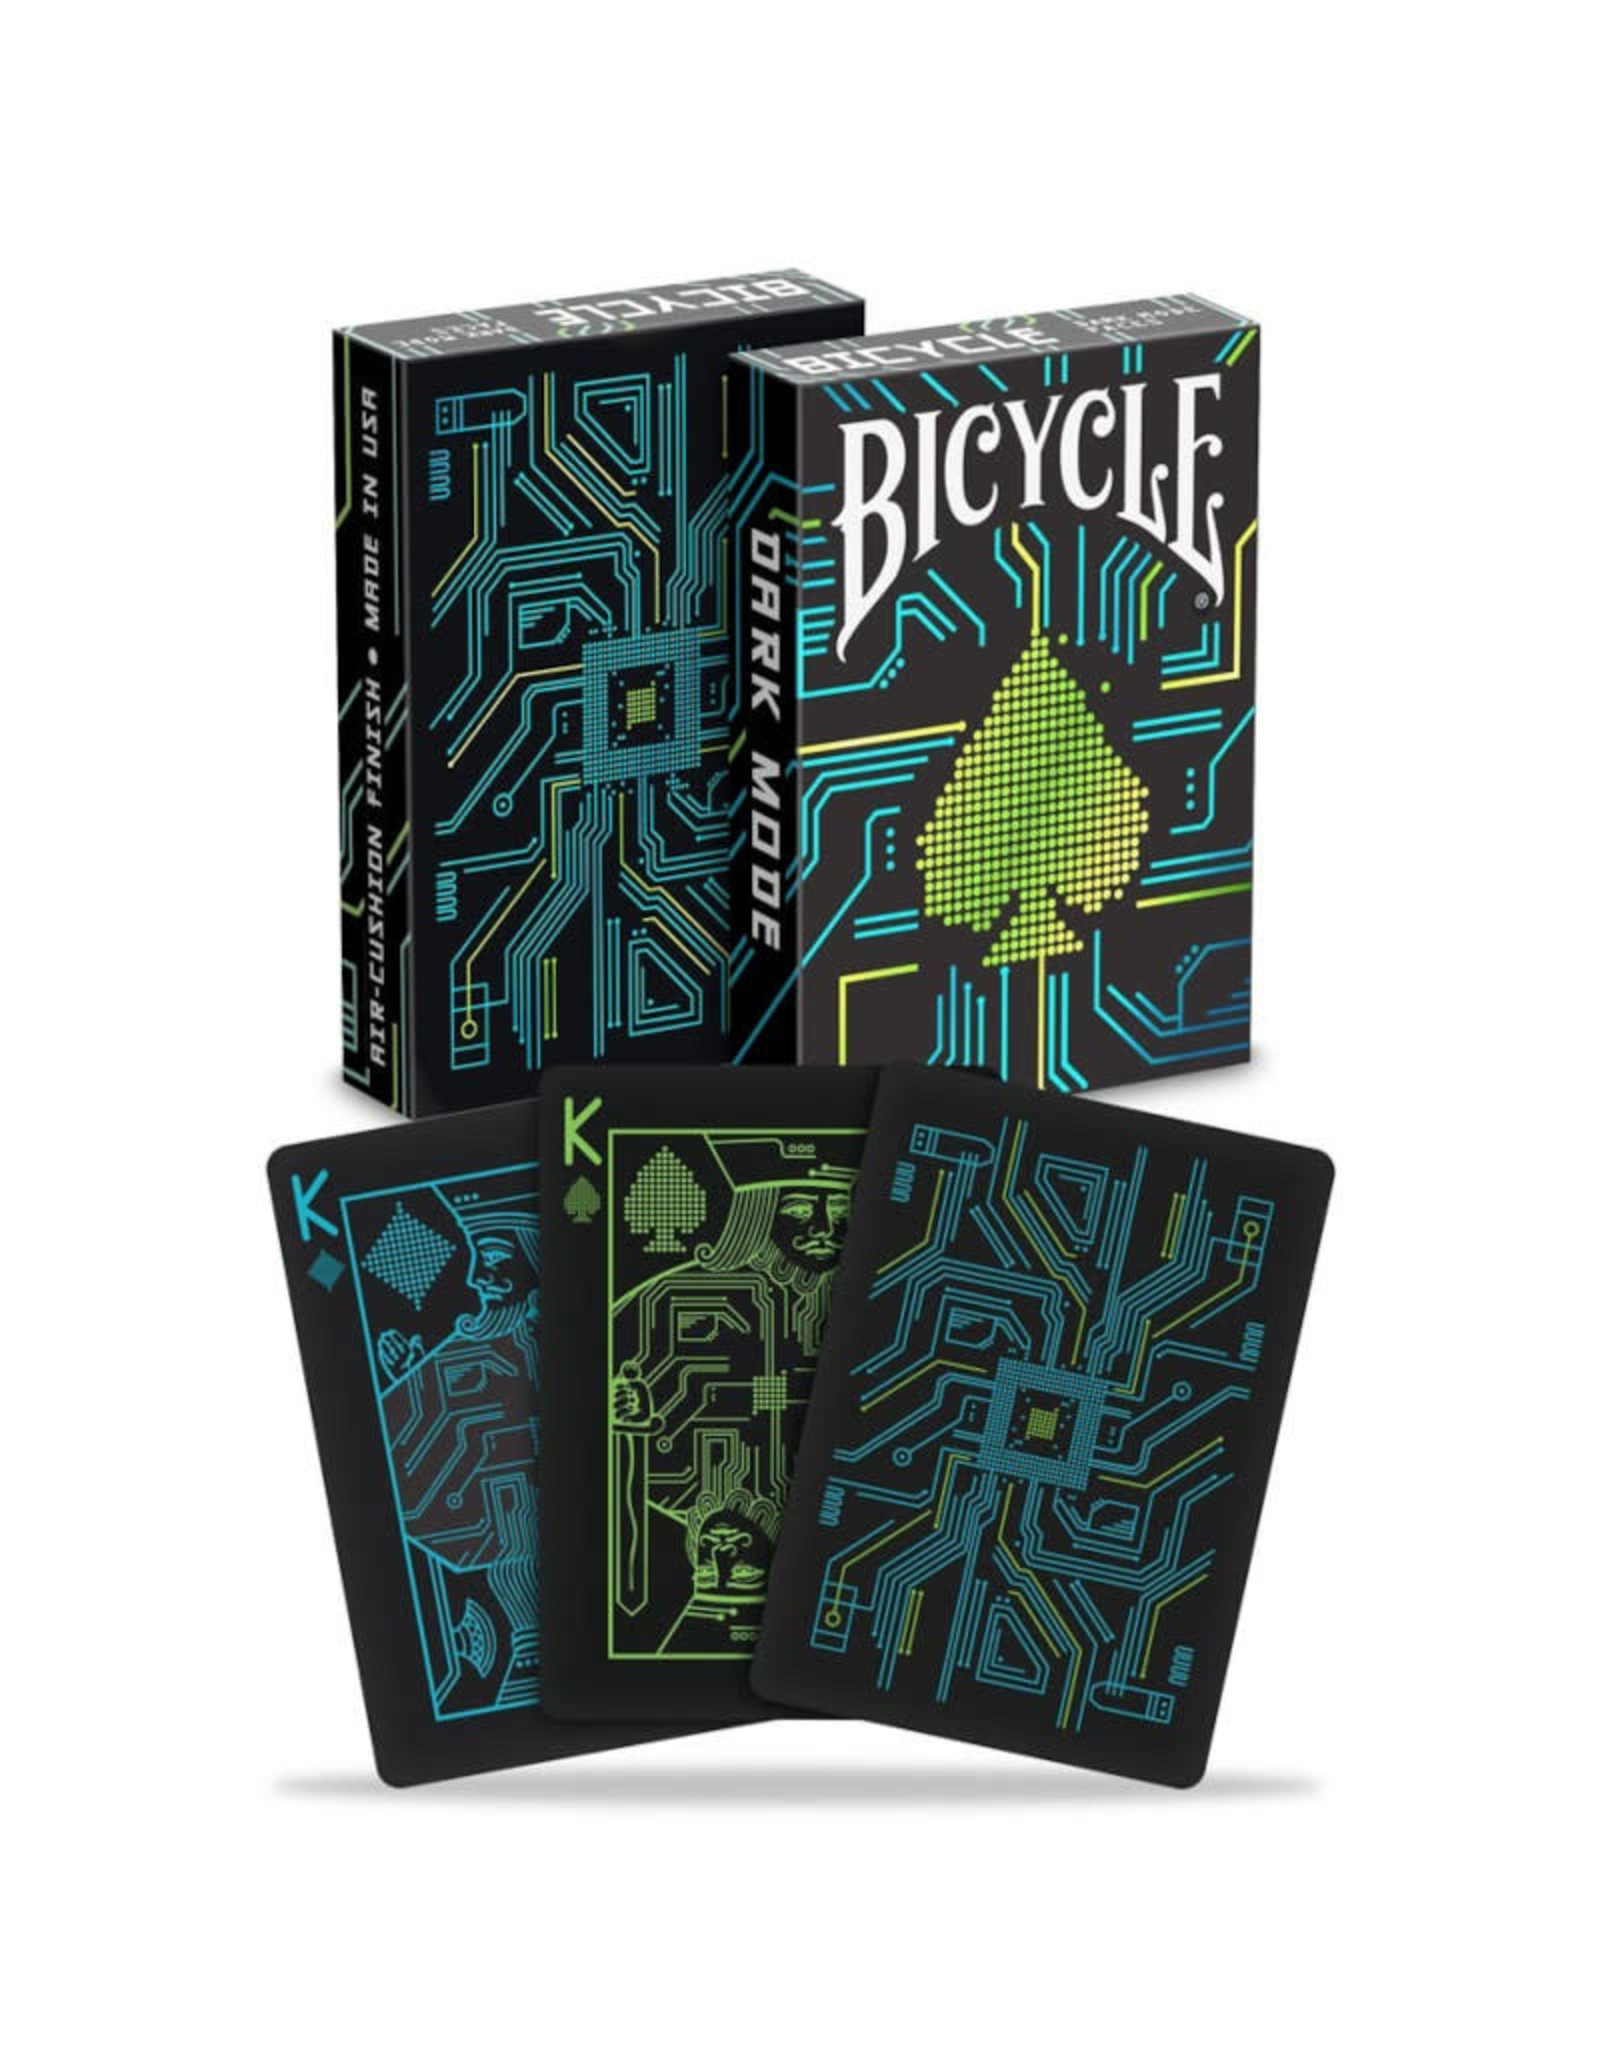 United States Playing Card Co Playing Cards: Bicycle Dark Mode